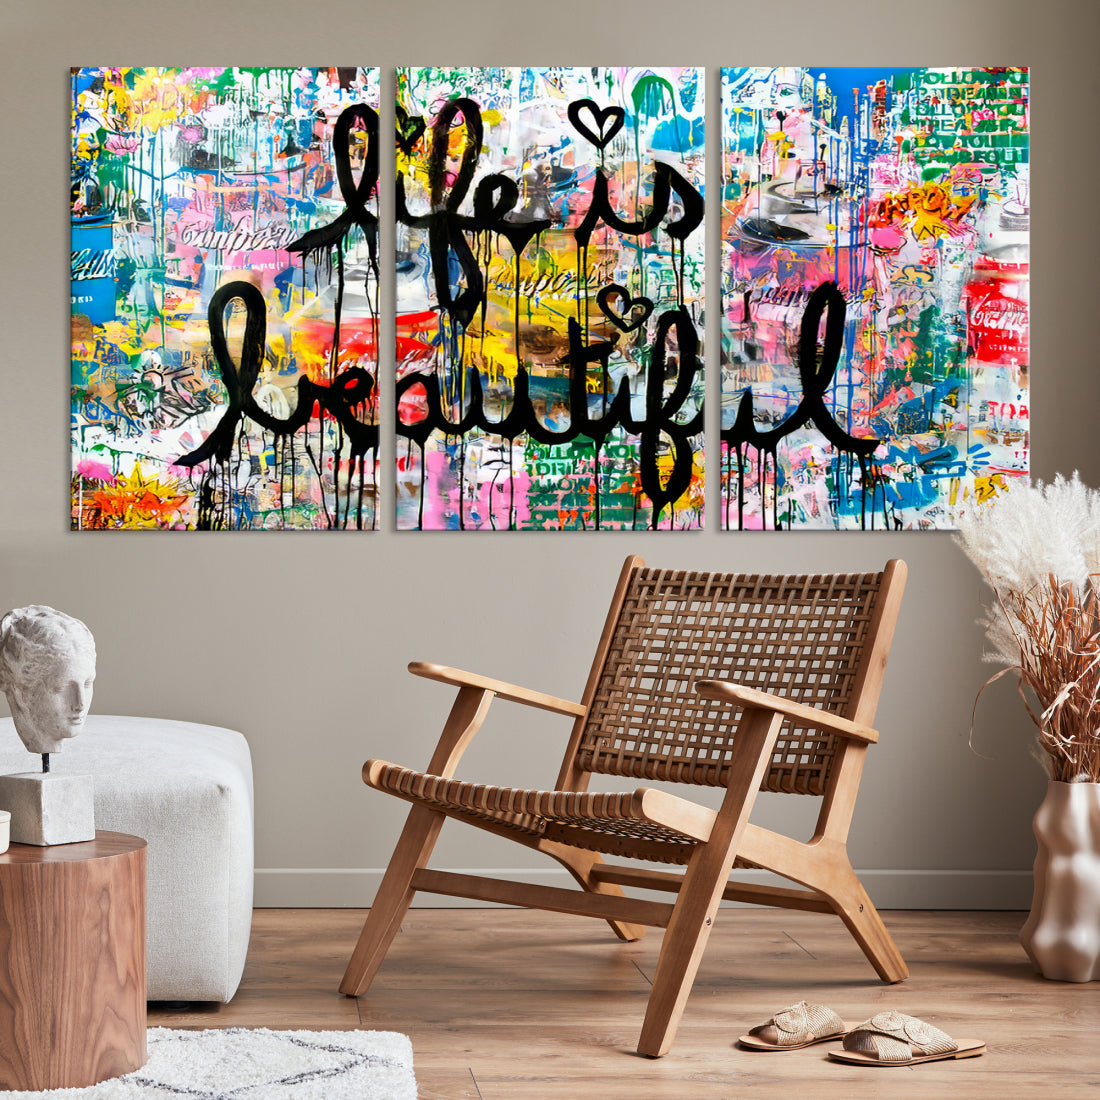 Life is Beautiful Motivational Wall Art Canvas Print Good Vibes Relaxing Living Room Wall Decor